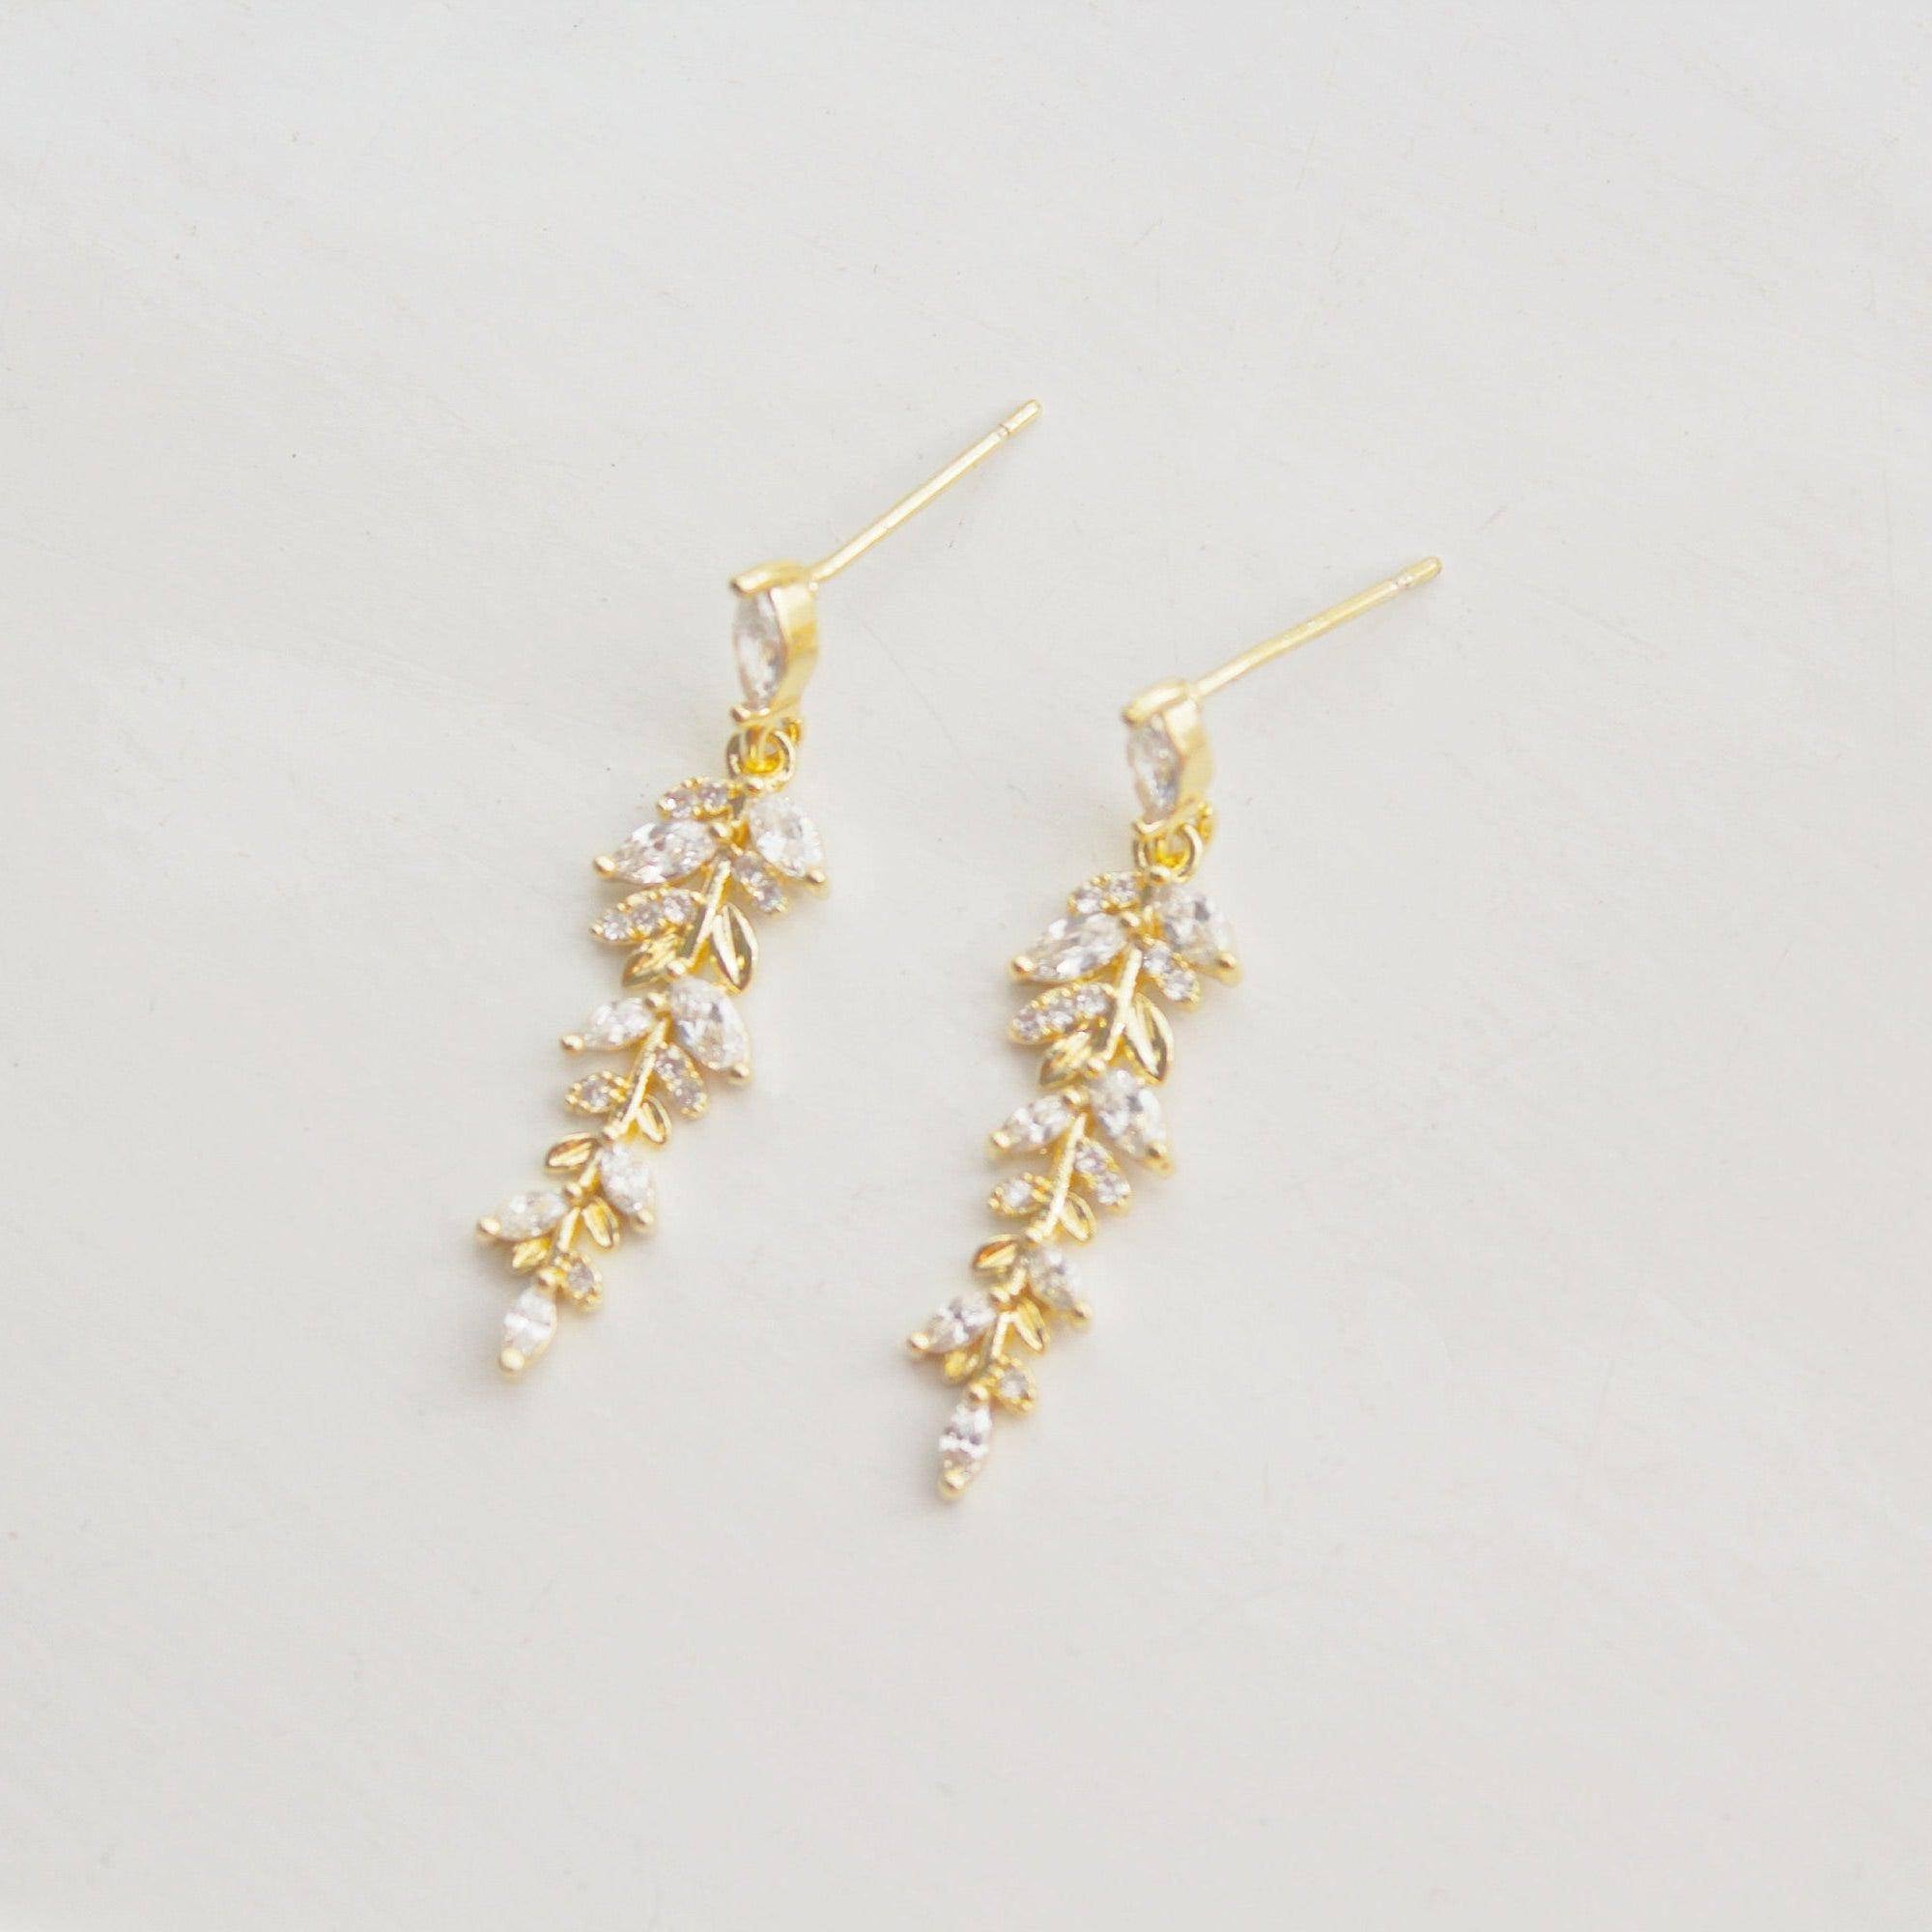 Gold and Crystal Willow Leaf Dangle Earrings - Elegant and Graceful Gift Box Included Bijou Her